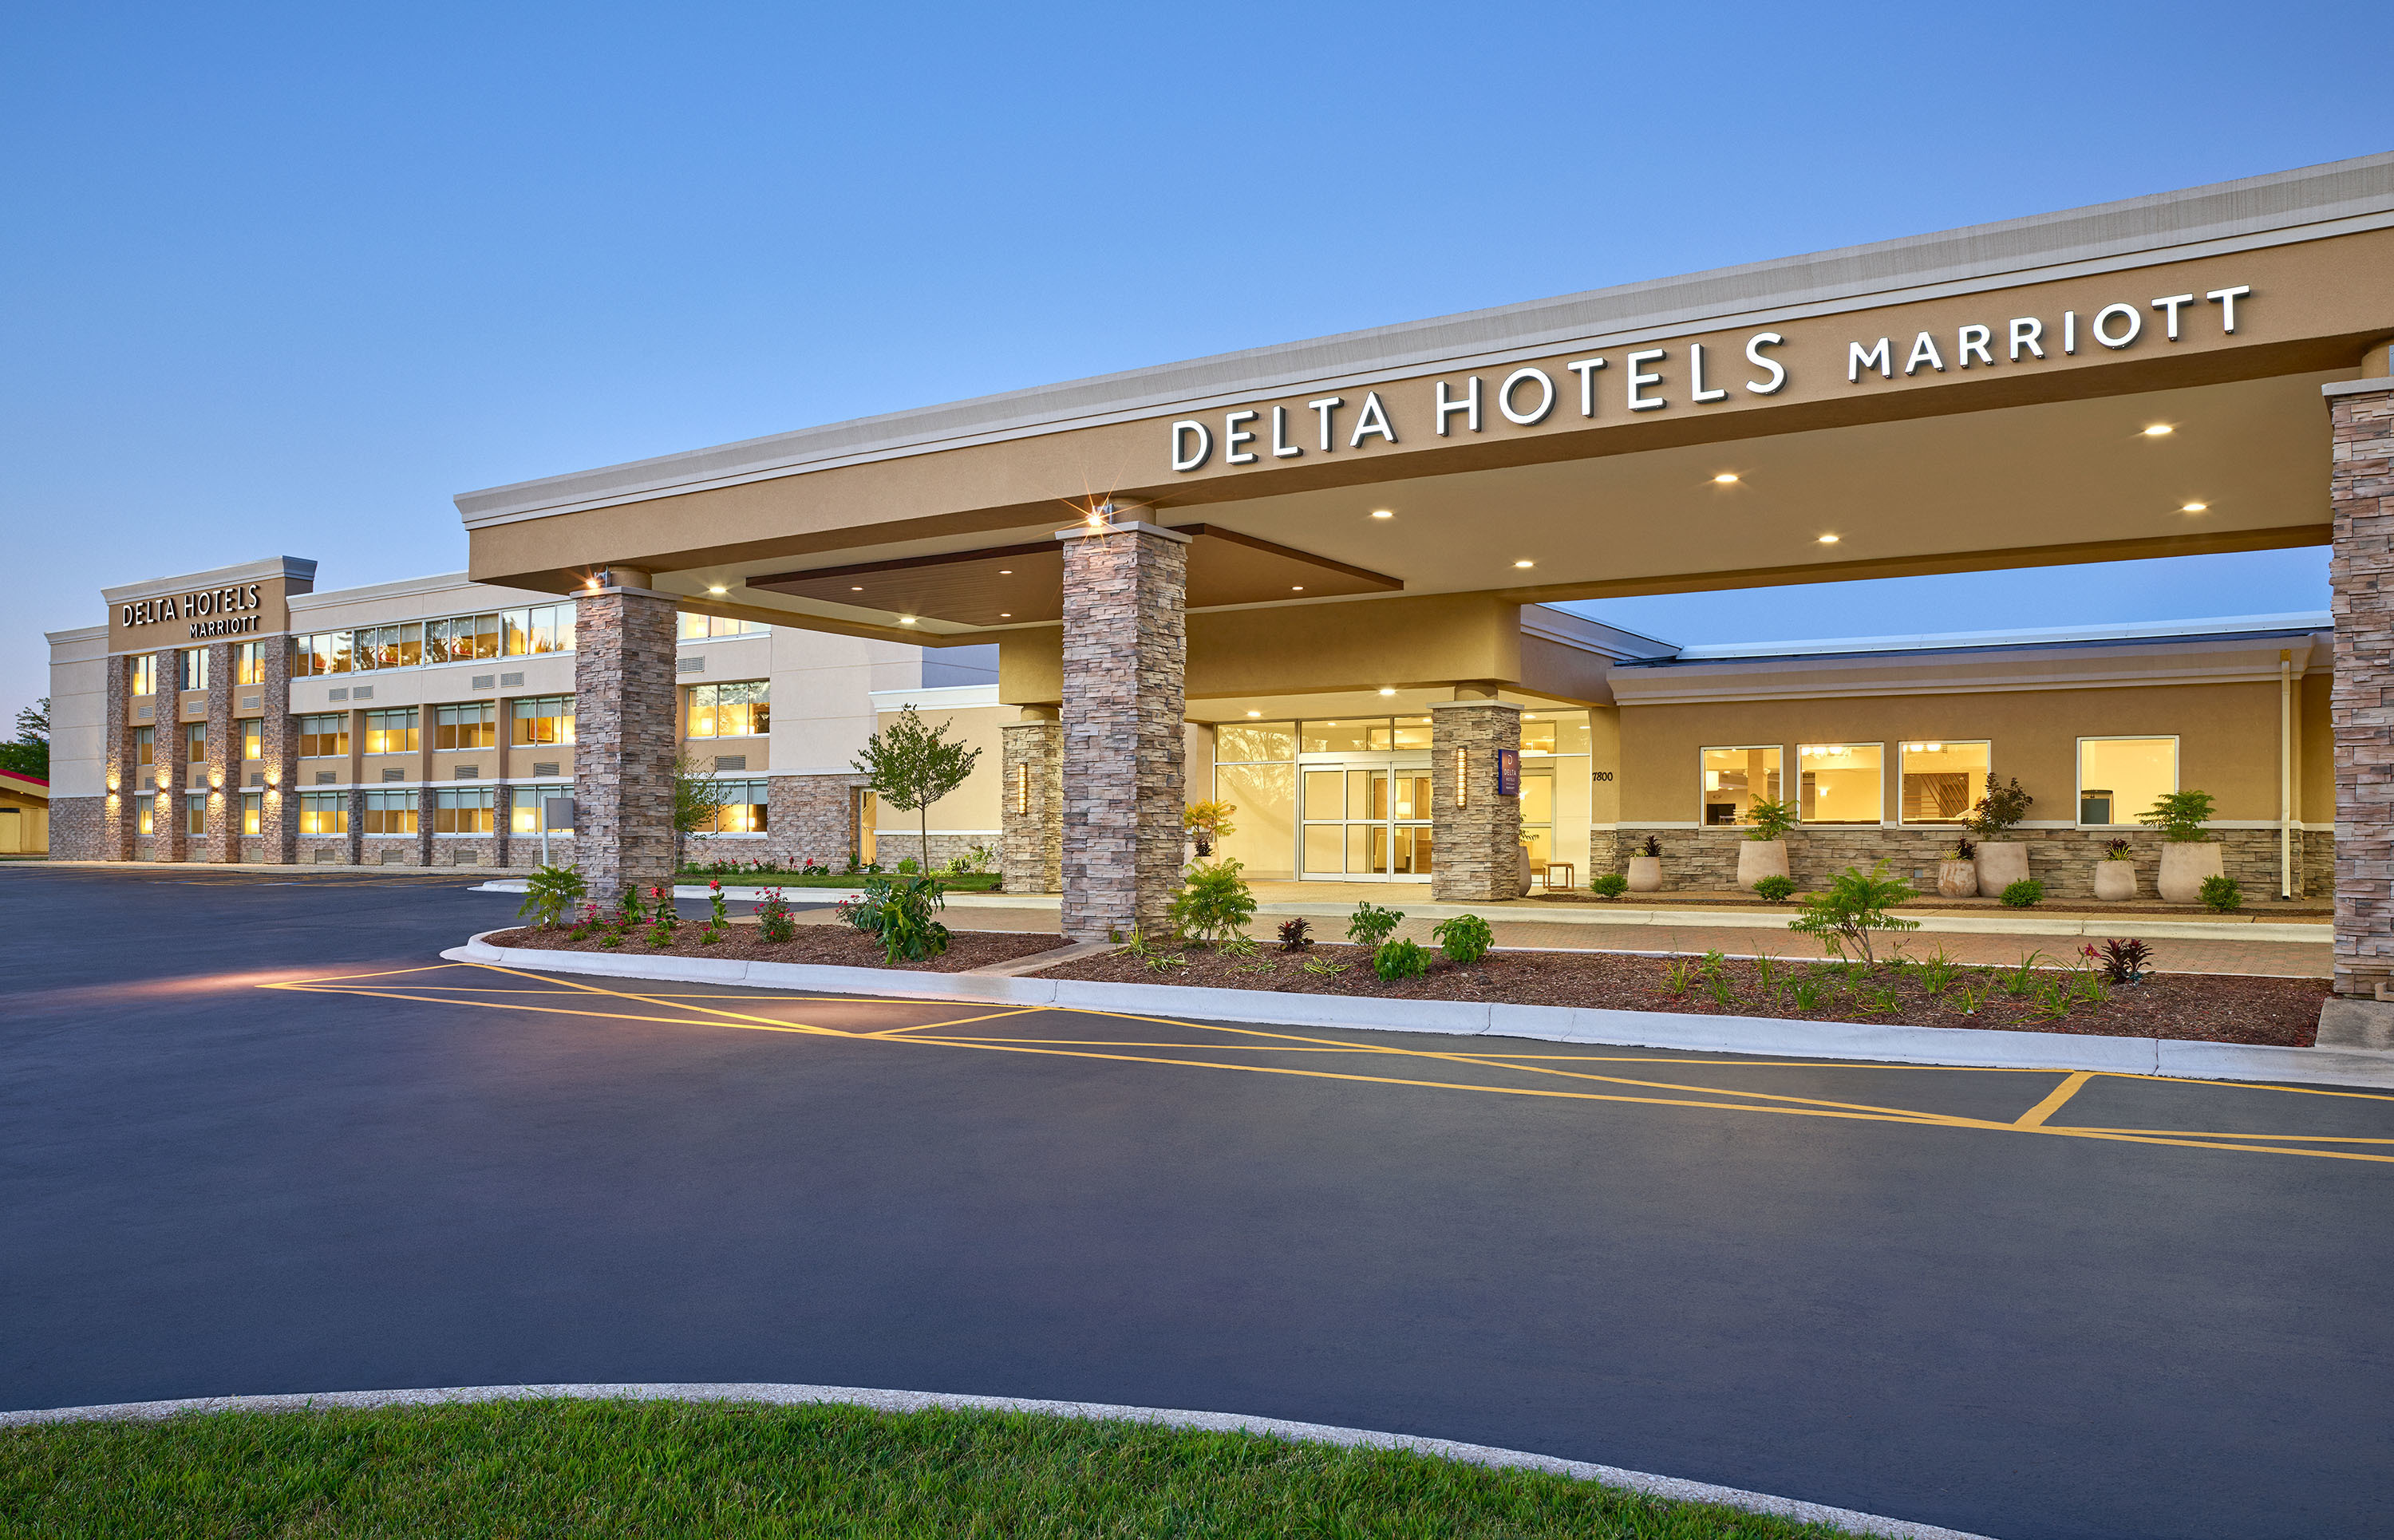 Photo of Delta Hotels Chicago Willowbrook, Willowbrook, IL